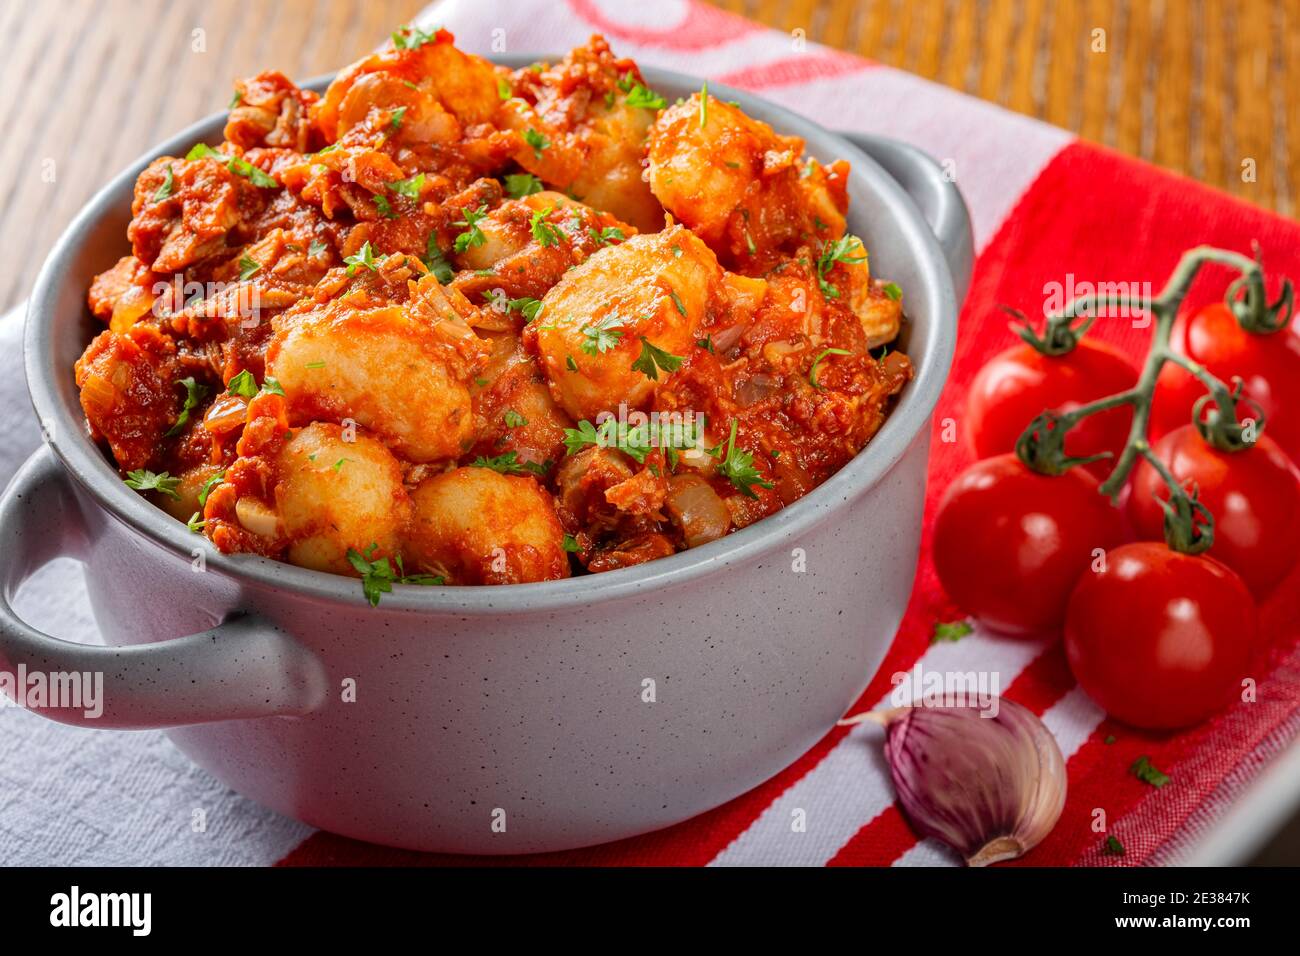 Goulash stew - traditional Hungarian food with herbs Stock Photo